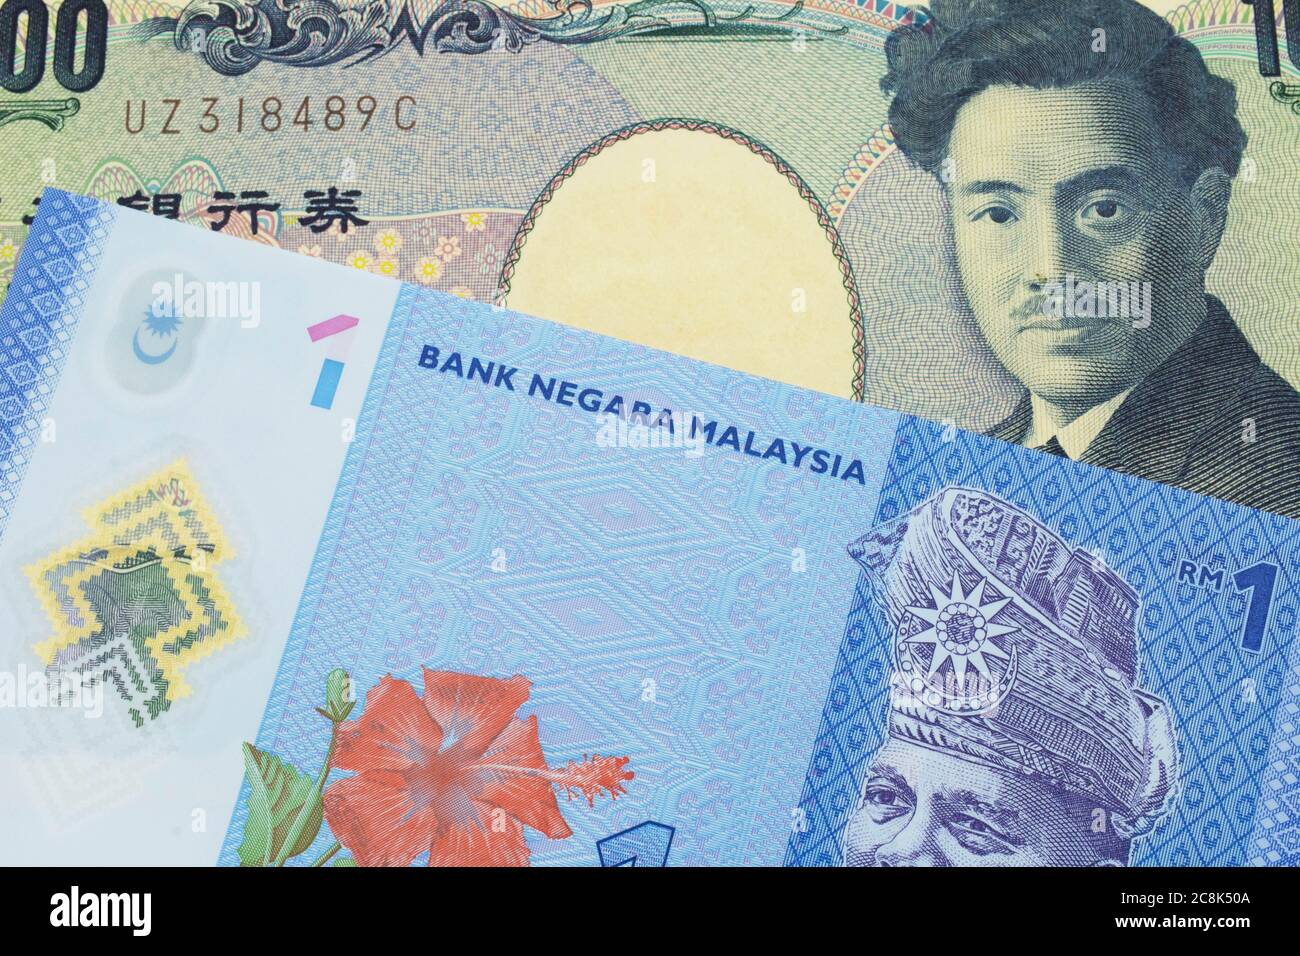 A Macro Image Of A Japanese Thousand Yen Note Paired Up With A Blue Plastic One Ringgit Bank Note From Malaysia Shot Close Up In Macro Stock Photo Alamy